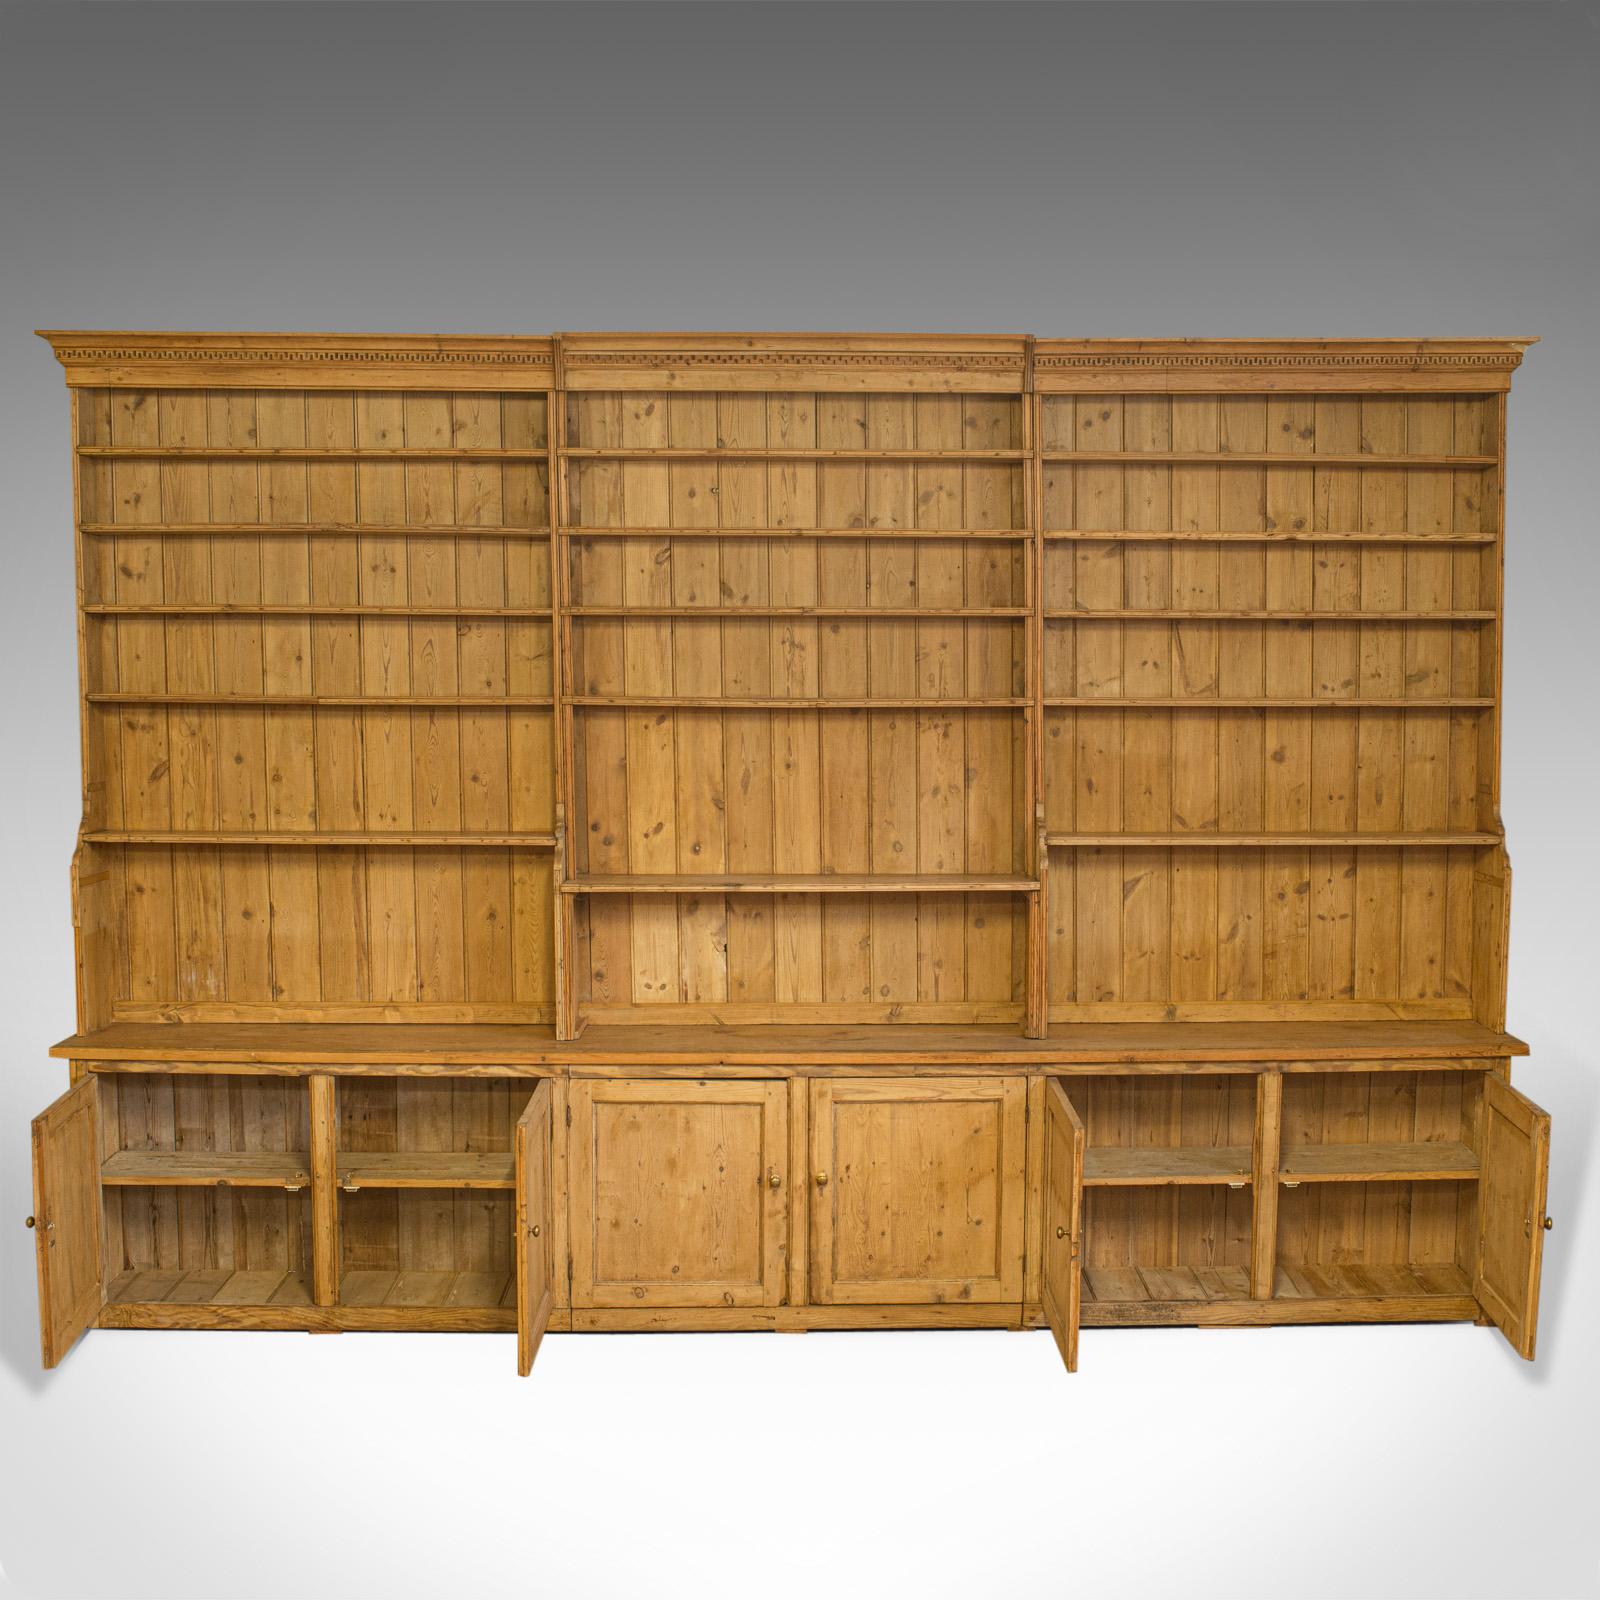 This is a very large, antique dresser at over 13 feet wide and 9 feet tall. A handmade, Victorian, pine, kitchen cabinet or bookcase of country house proportions dating to the mid-19th century, circa 1850.

Substantial cabinet of country house